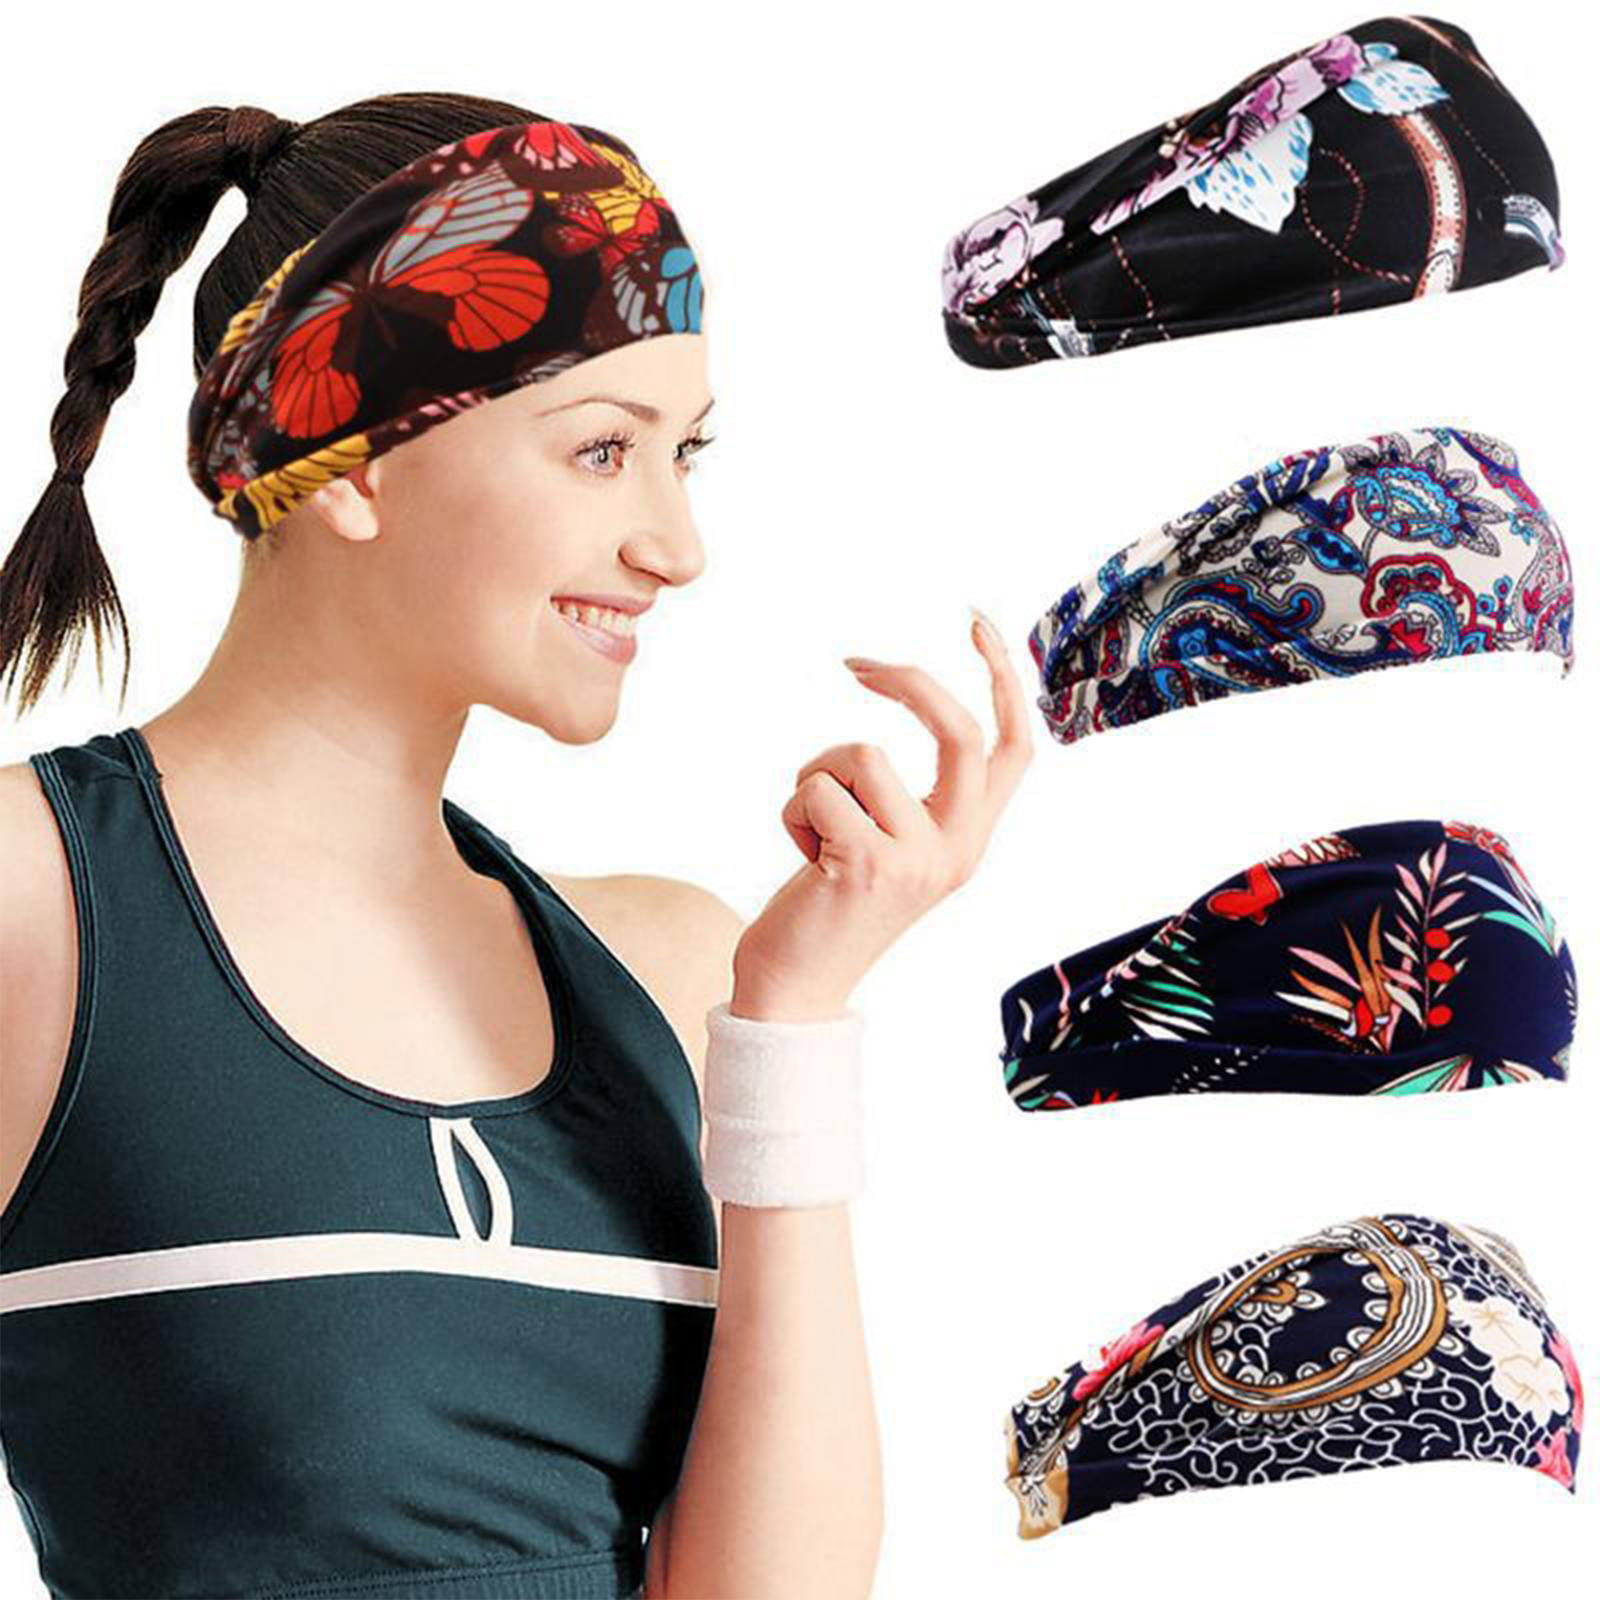 Details about   Fitness Elastic Headwrap Head Band Sport Hairbands Athletic Wear Yoga Headbands